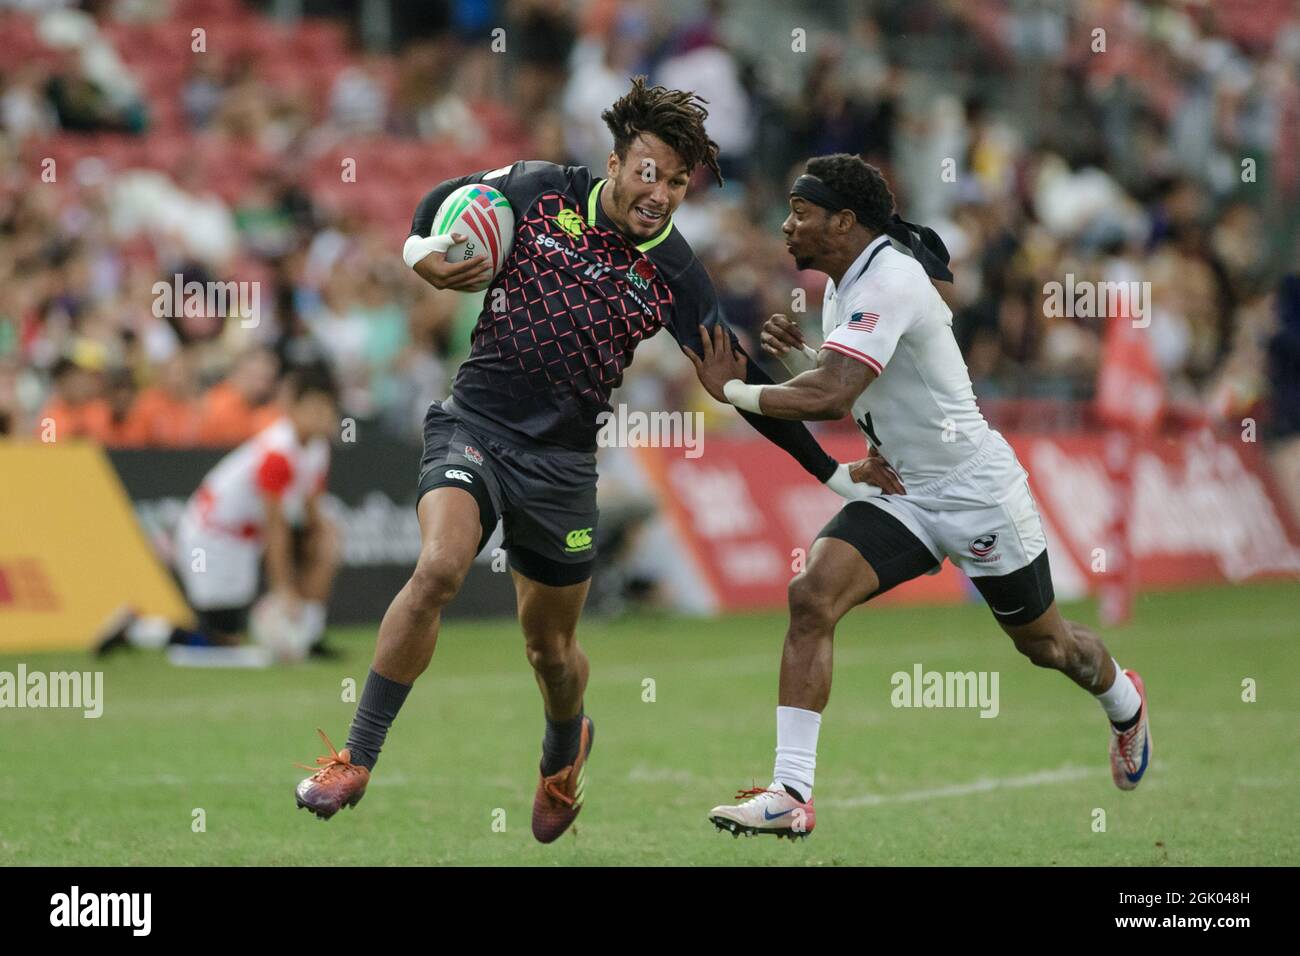 SINGAPORE-APRIL 14: Ryan Olowofela of England 7s Team (blue) in action against Carlin Isles of USA 7s team (white) during the Bronze medal match of HSBC World Rugby Singapore Sevens on April 14, 2019 at National Stadium in Singapore Stock Photo